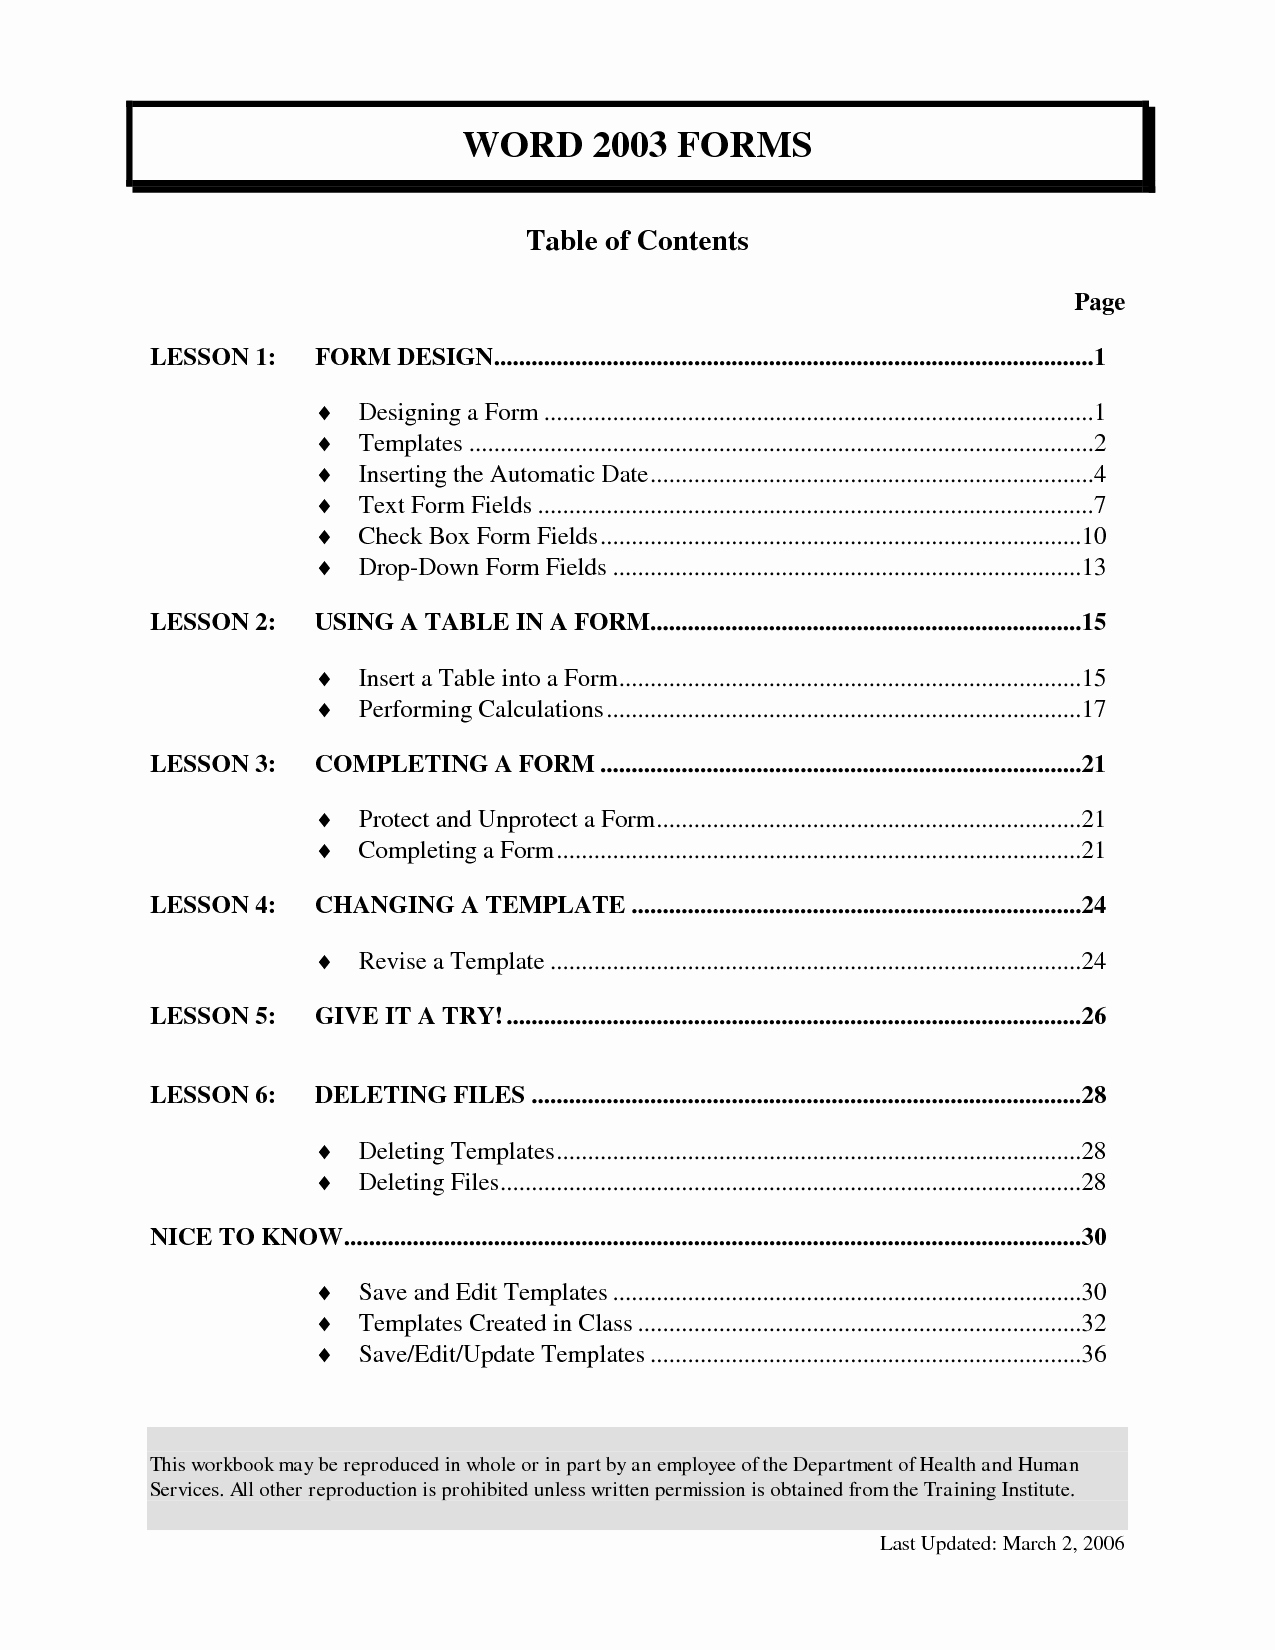 Table Contents Template Word